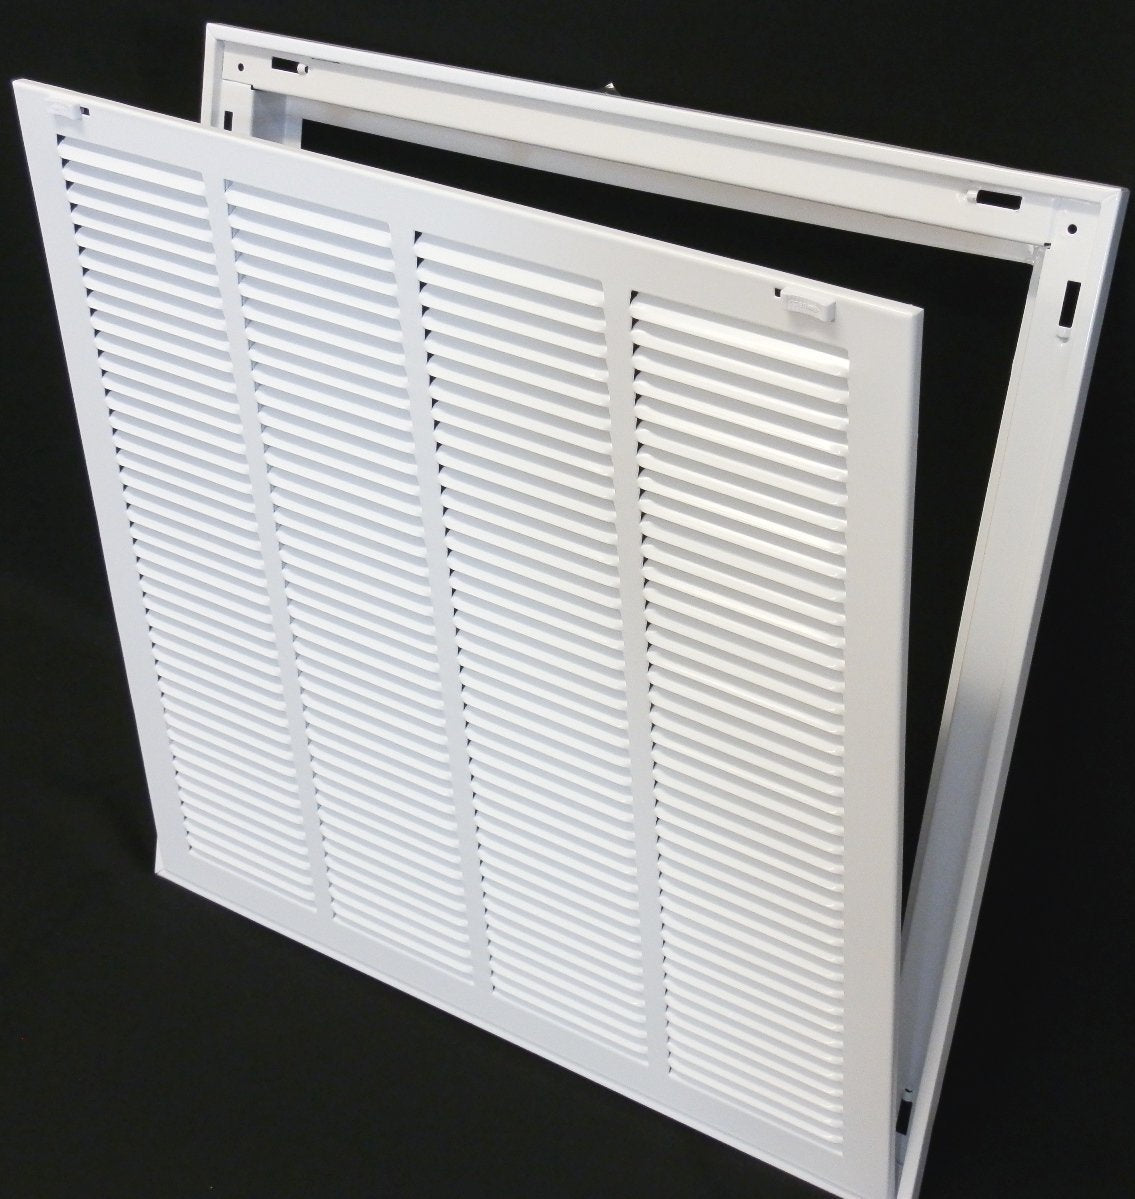 34&quot; X 24&quot; Steel Return Air Filter Grille for 1&quot; Filter - Removable Frame - [Outer Dimensions: 36 5/8&quot; X 26 5/8&quot;]